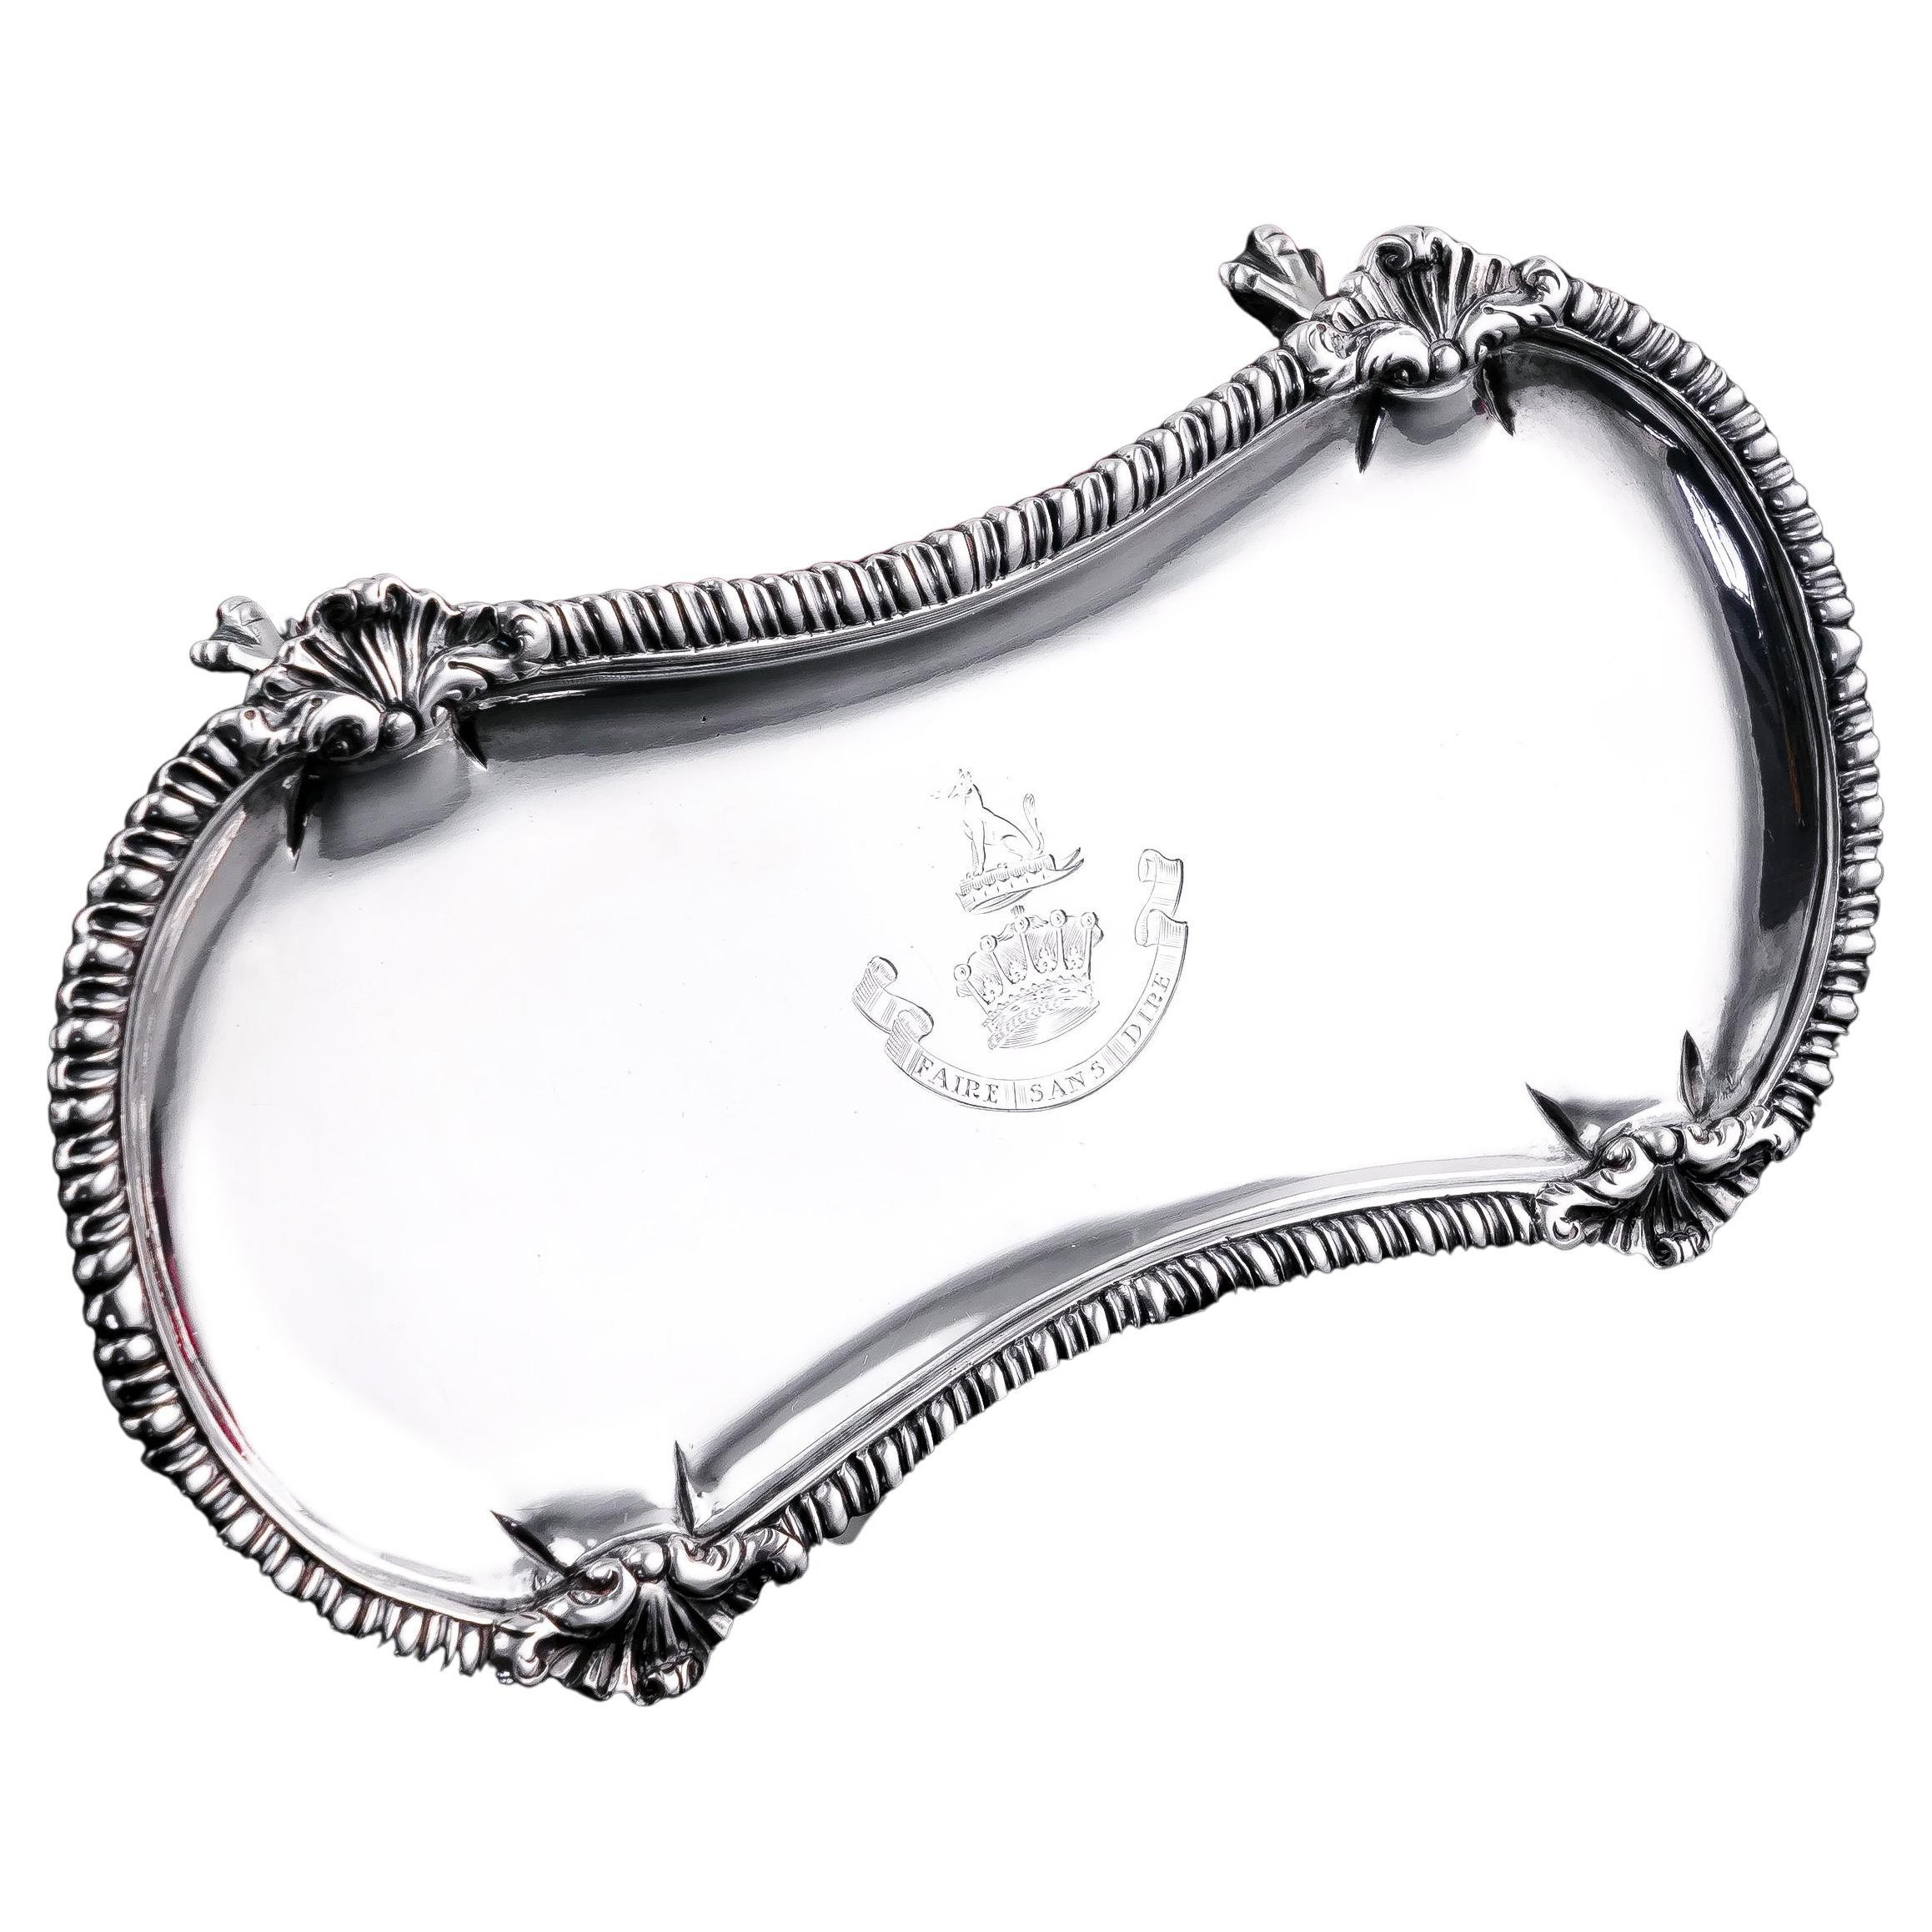 Antique Georgian Solid Silver Snuffer / Pen Tray Salver, Earl of Ilchester, 1774